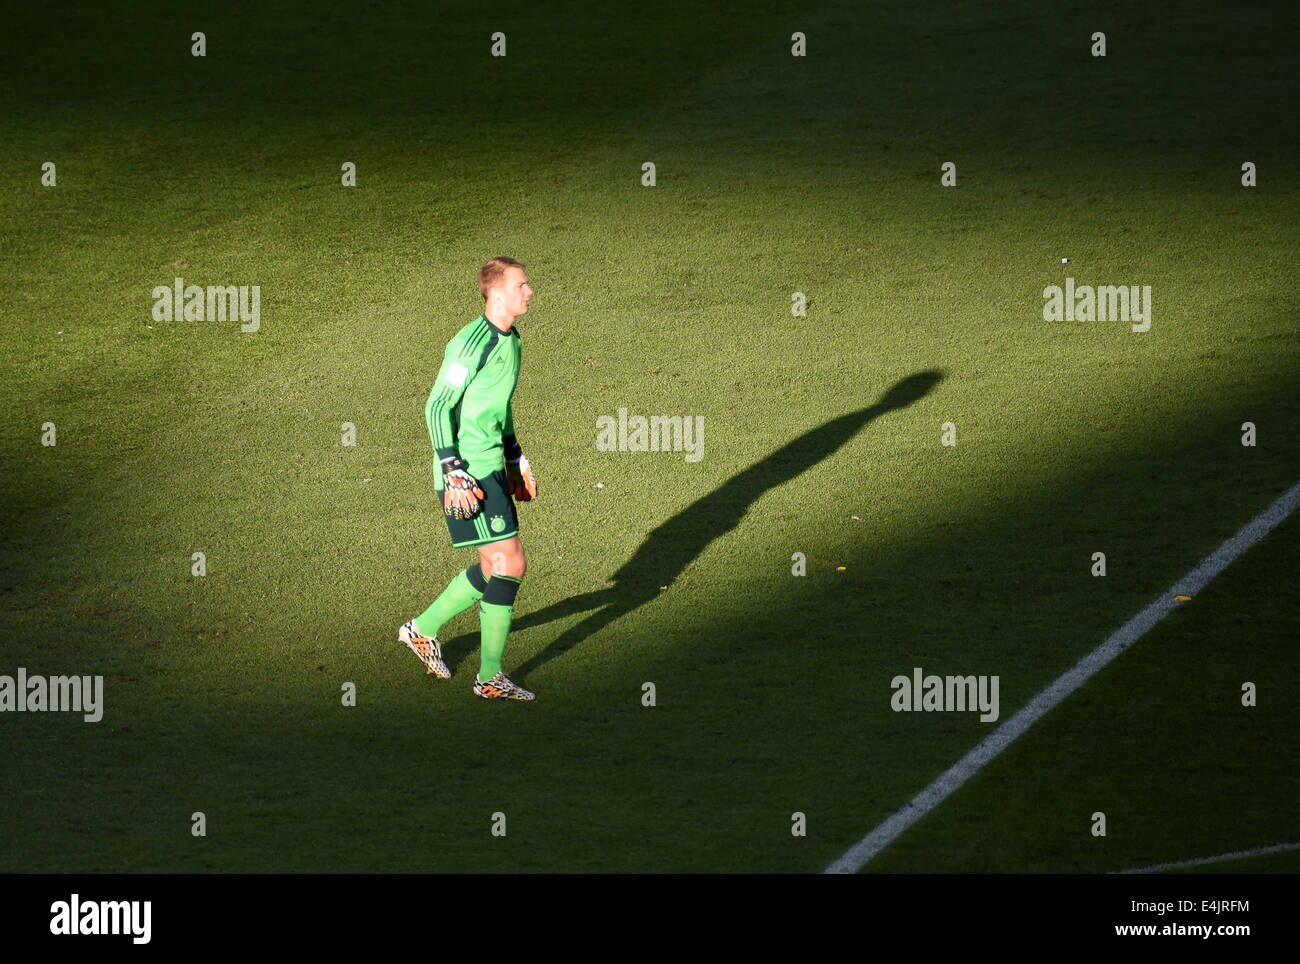 Rio de Janeiro, Brazil. 13th July, 2014. Goalkeeper Manuel Neuer of Germany walks on the pitch during the FIFA World Cup 2014 final soccer match between Germany and Argentina at the Estadio do Maracana in Rio de Janeiro, Brazil, 13 July 2014. Photo: Thomas Eisenhuth/dpa/Alamy Live News Stock Photo